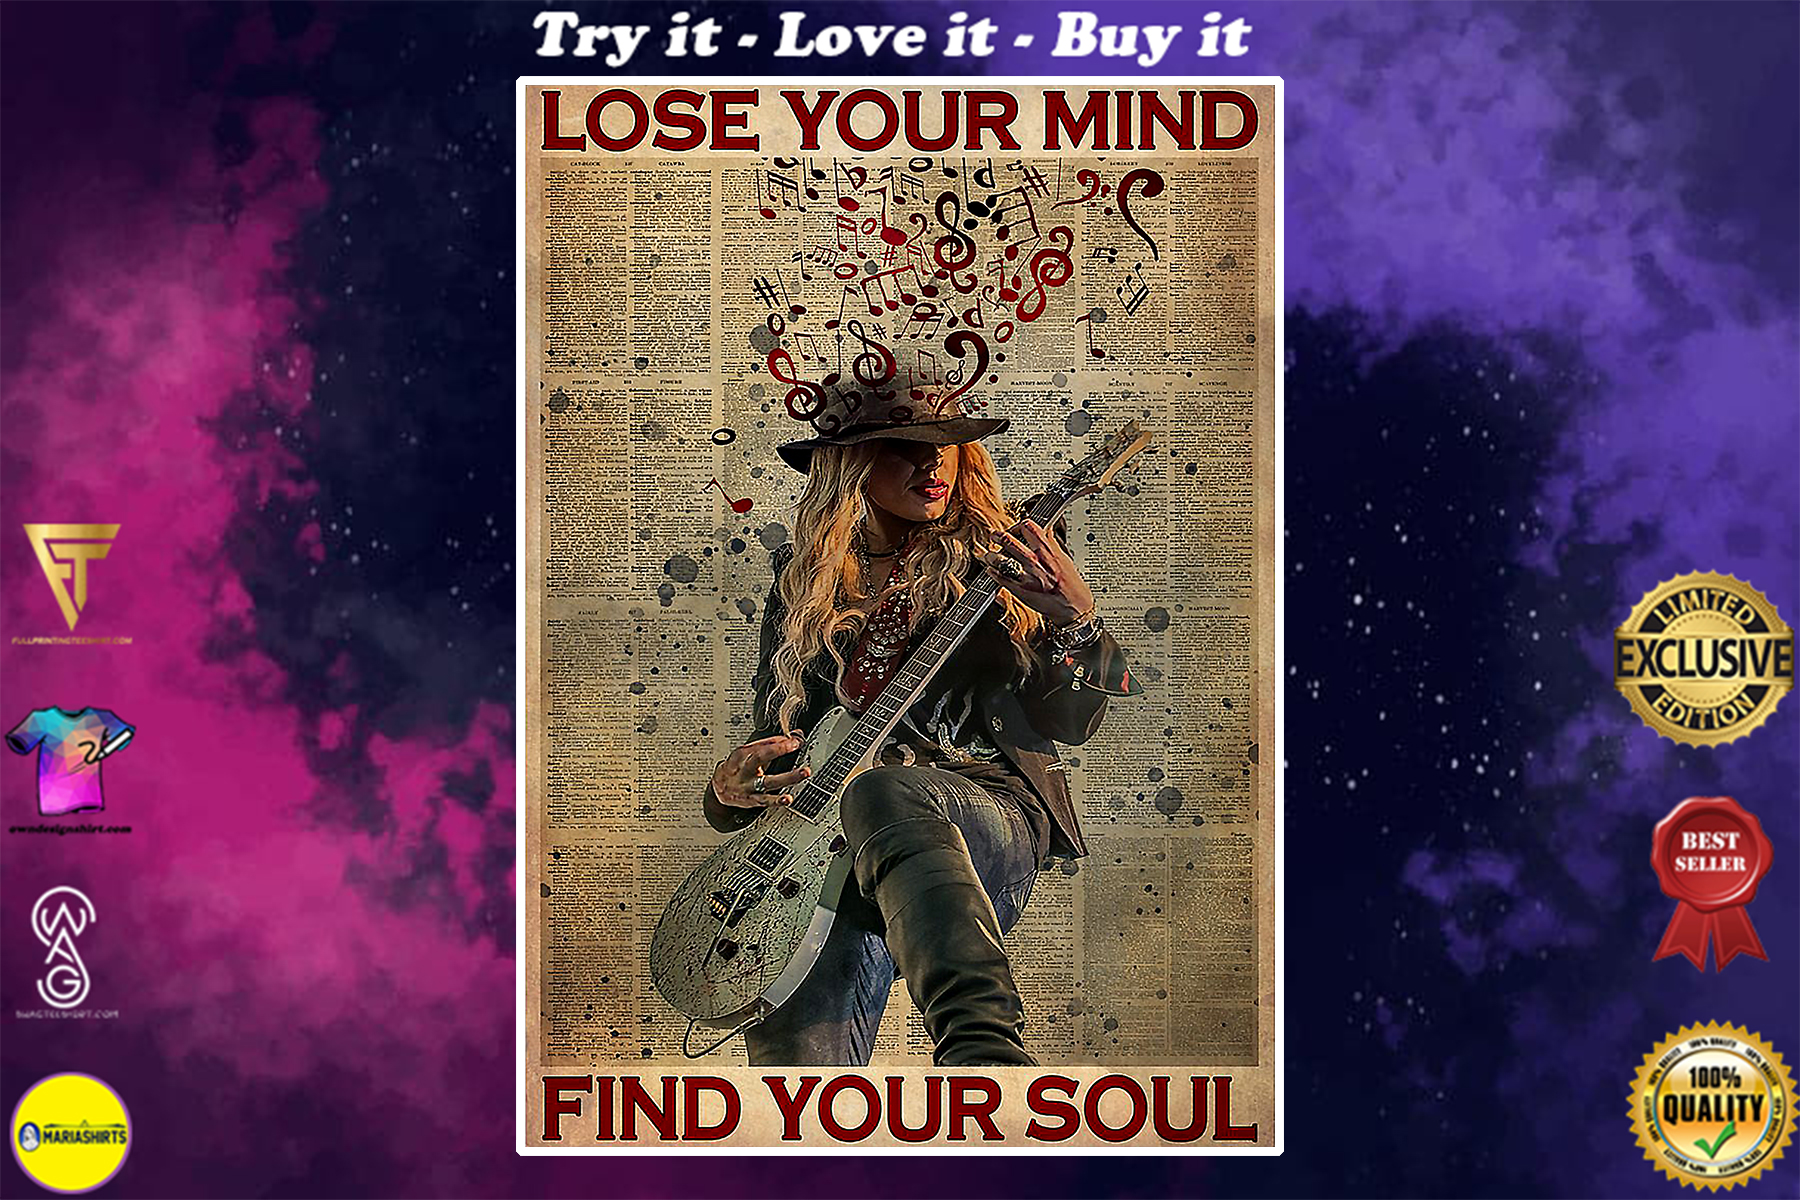 vintage female guitarist rock and roll lose your mind find your soul poster